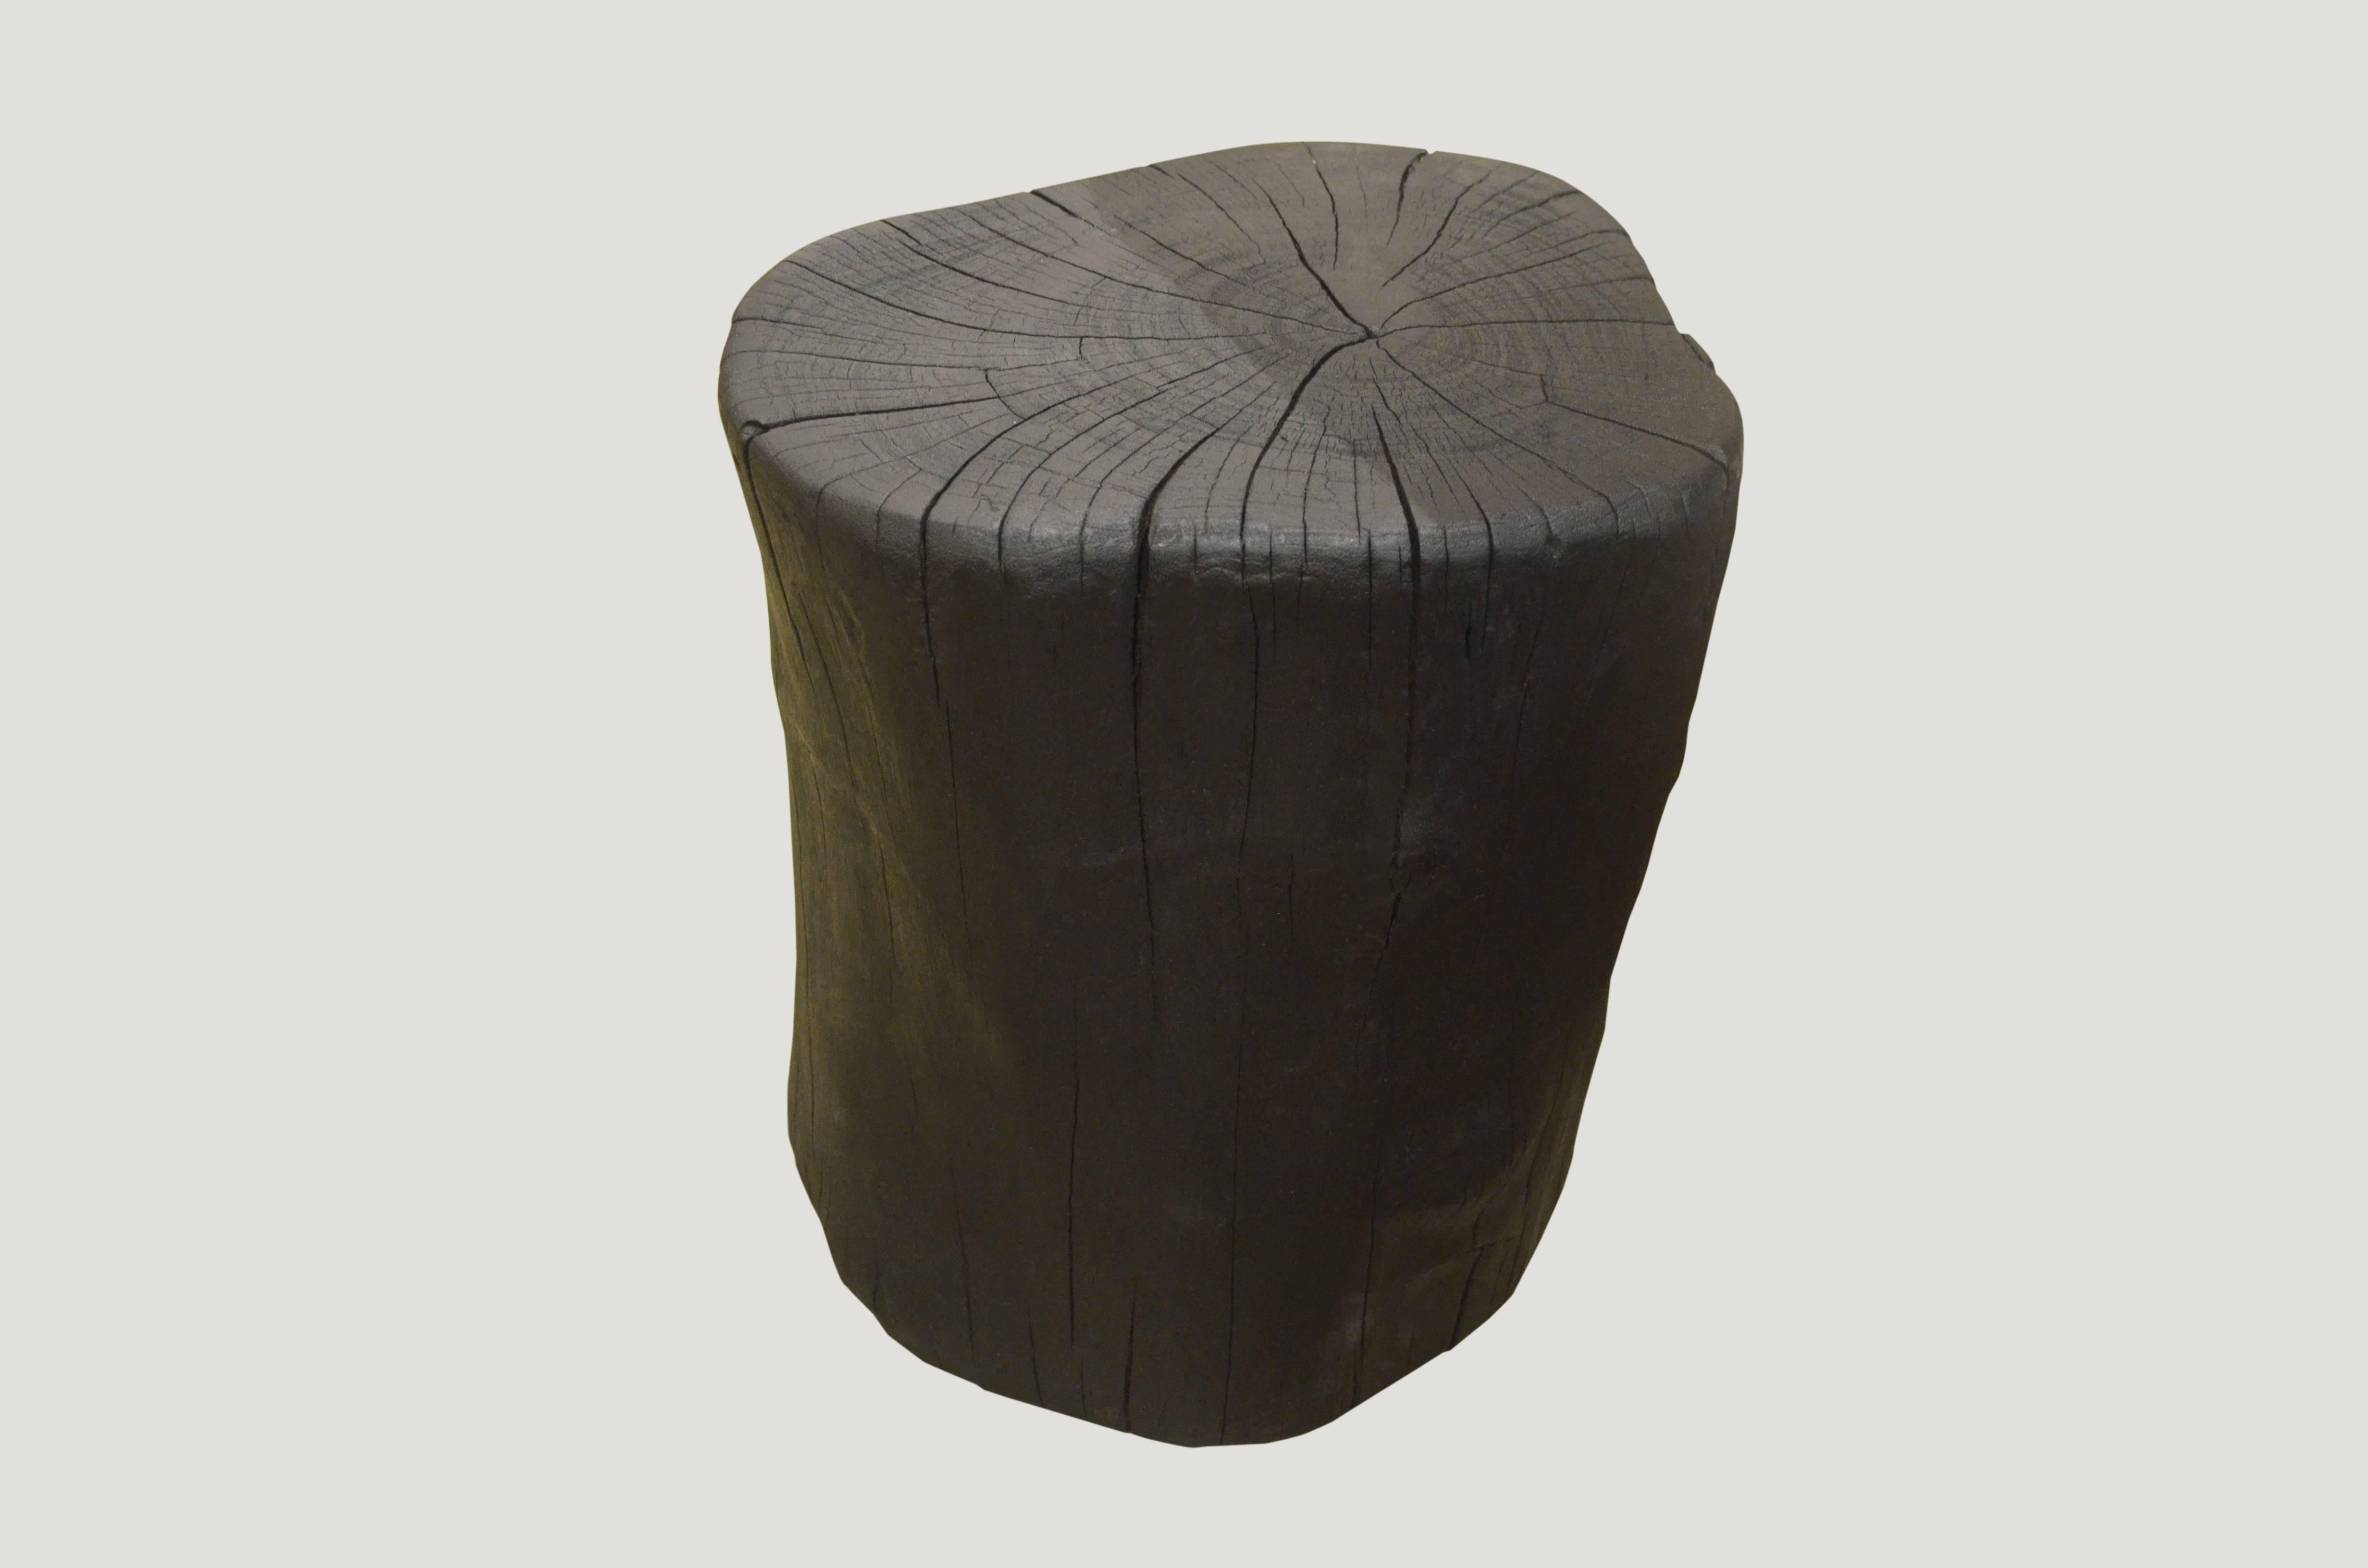 Solid organic shaped reclaimed teak wood side table. Burnt, sanded and sealed with a smooth finish.

The Triple Burnt collection represents a unique line of modern furniture made from solid organic wood. Burnt three times to produce a rich, charcoal